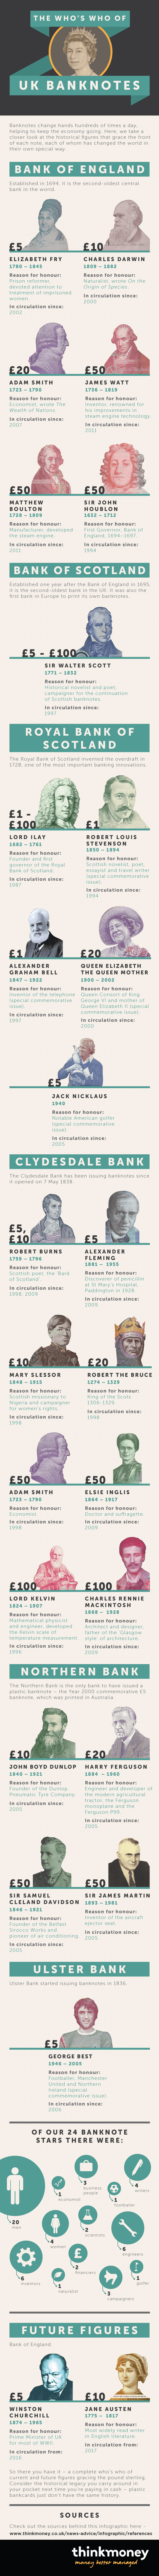 The Who’s Who of UK Banknotes